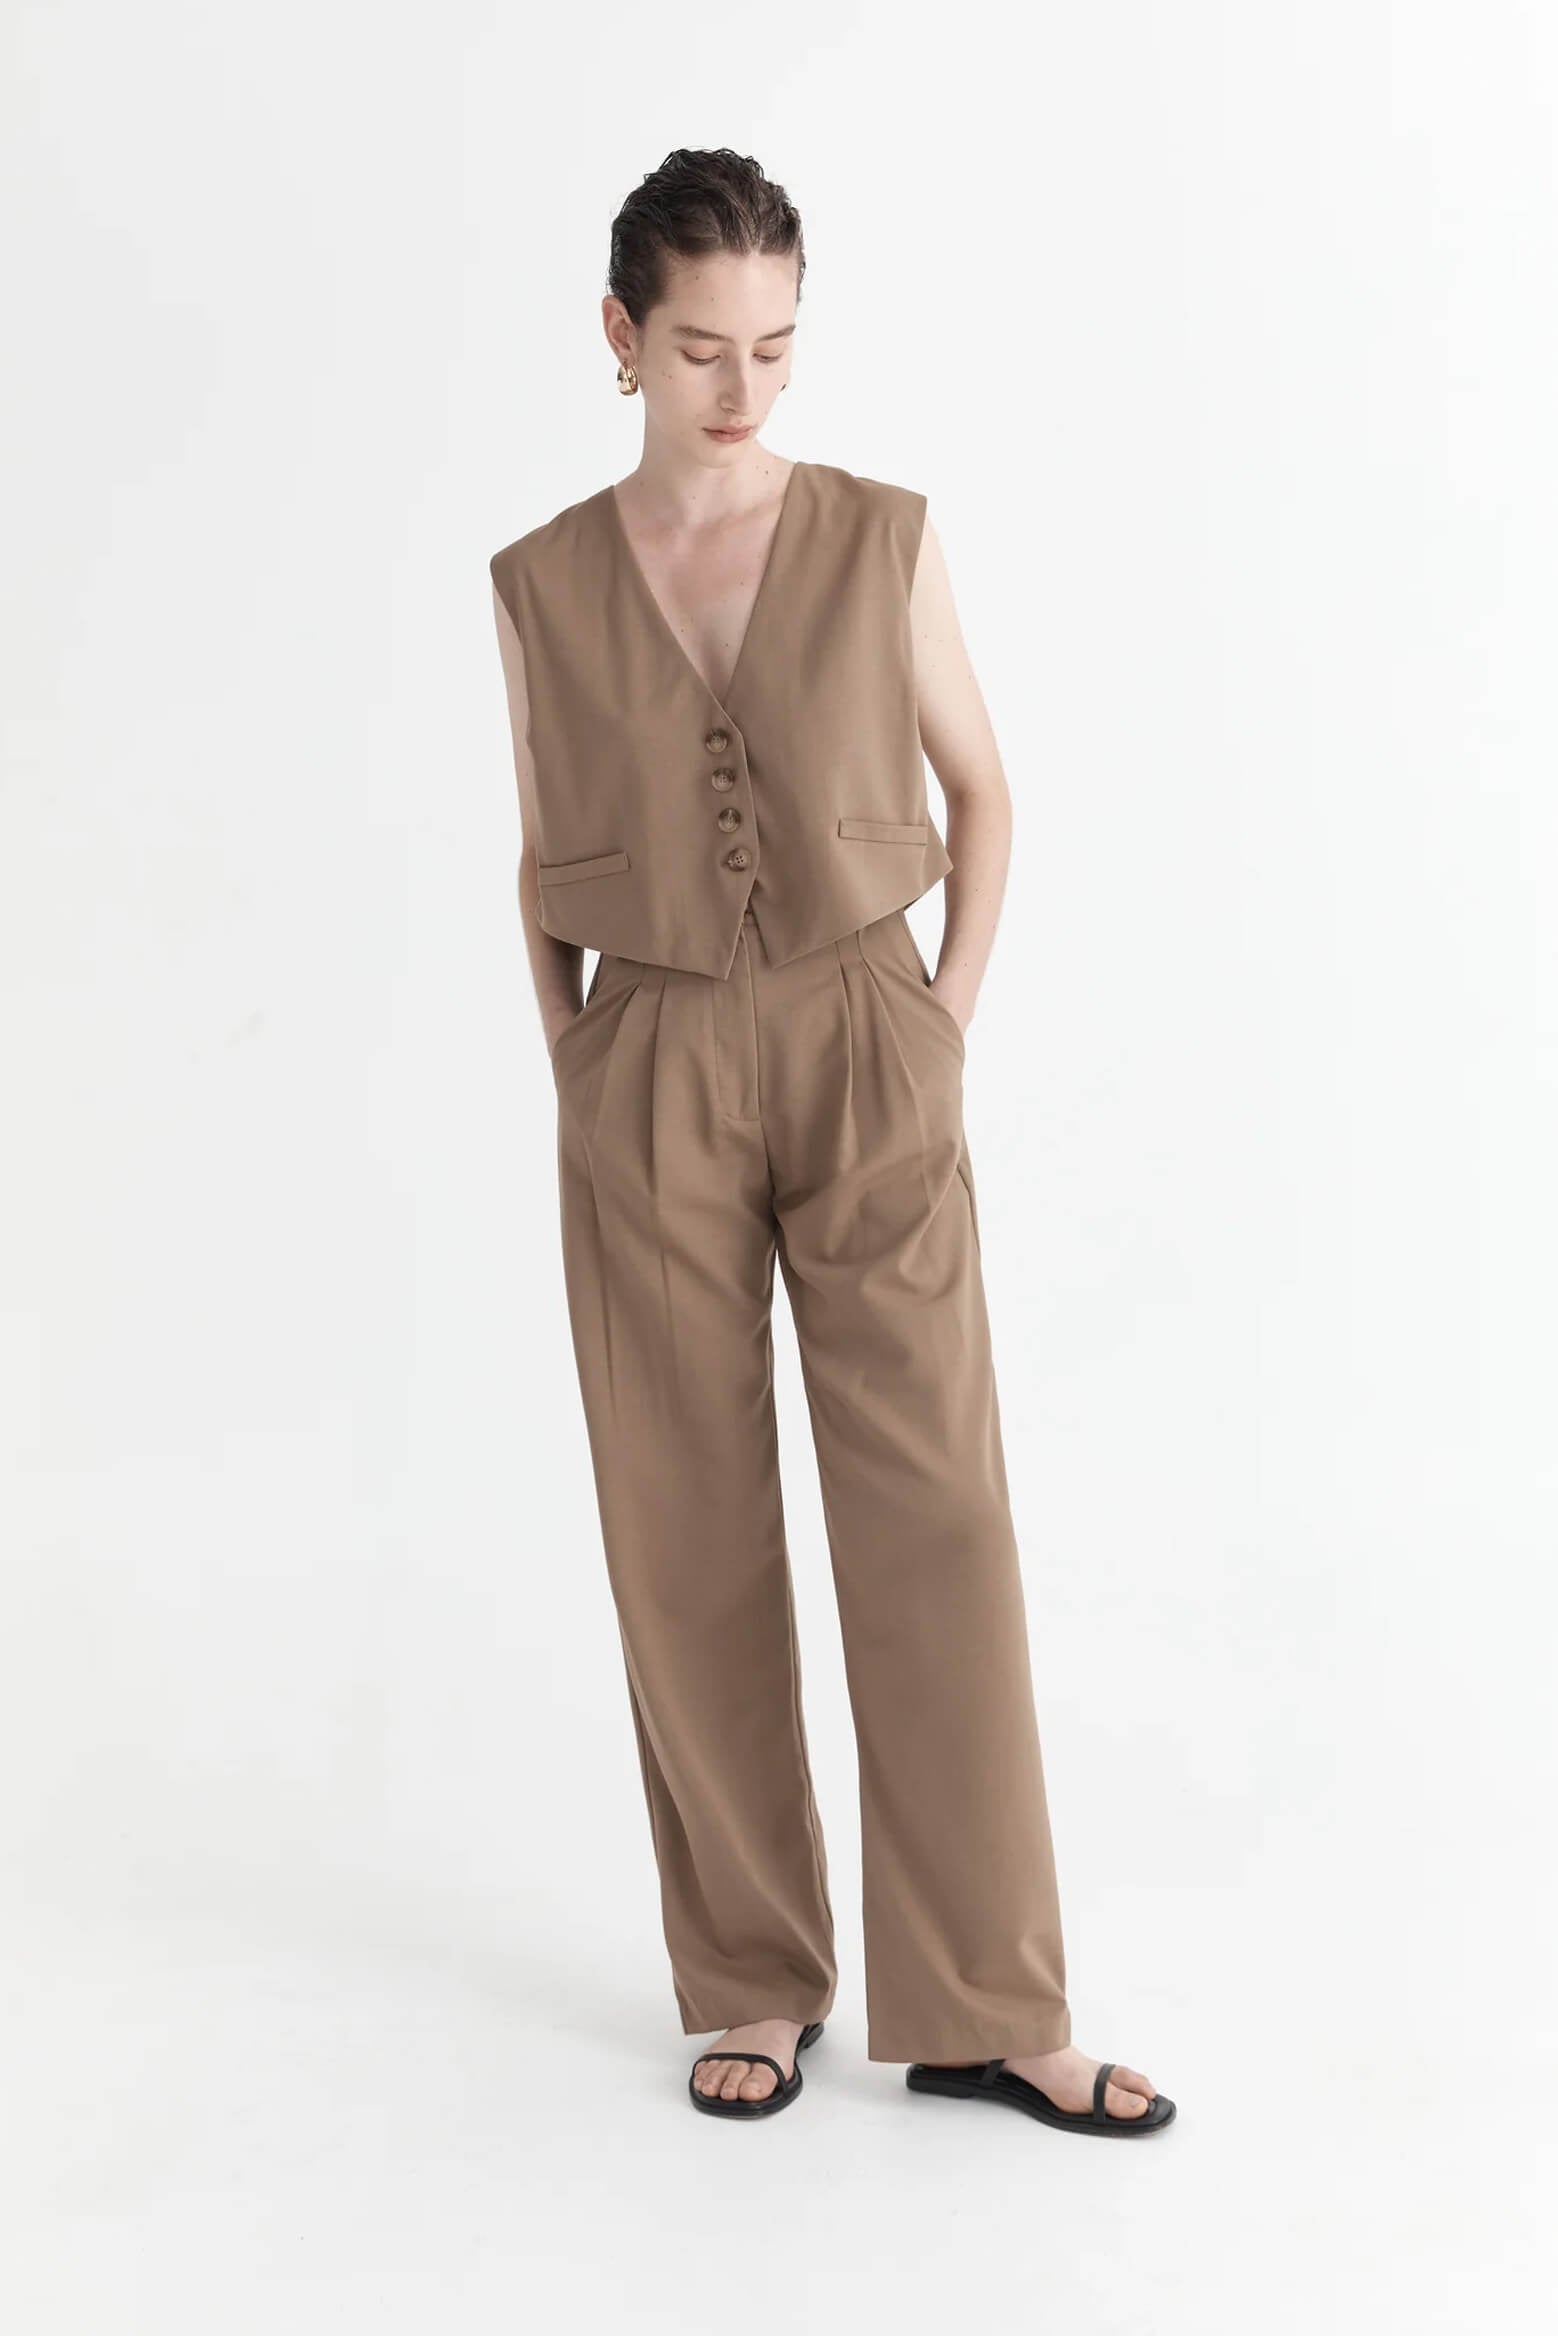 Solaqua The Leon Pants in Creme available at The New Trend Australia.